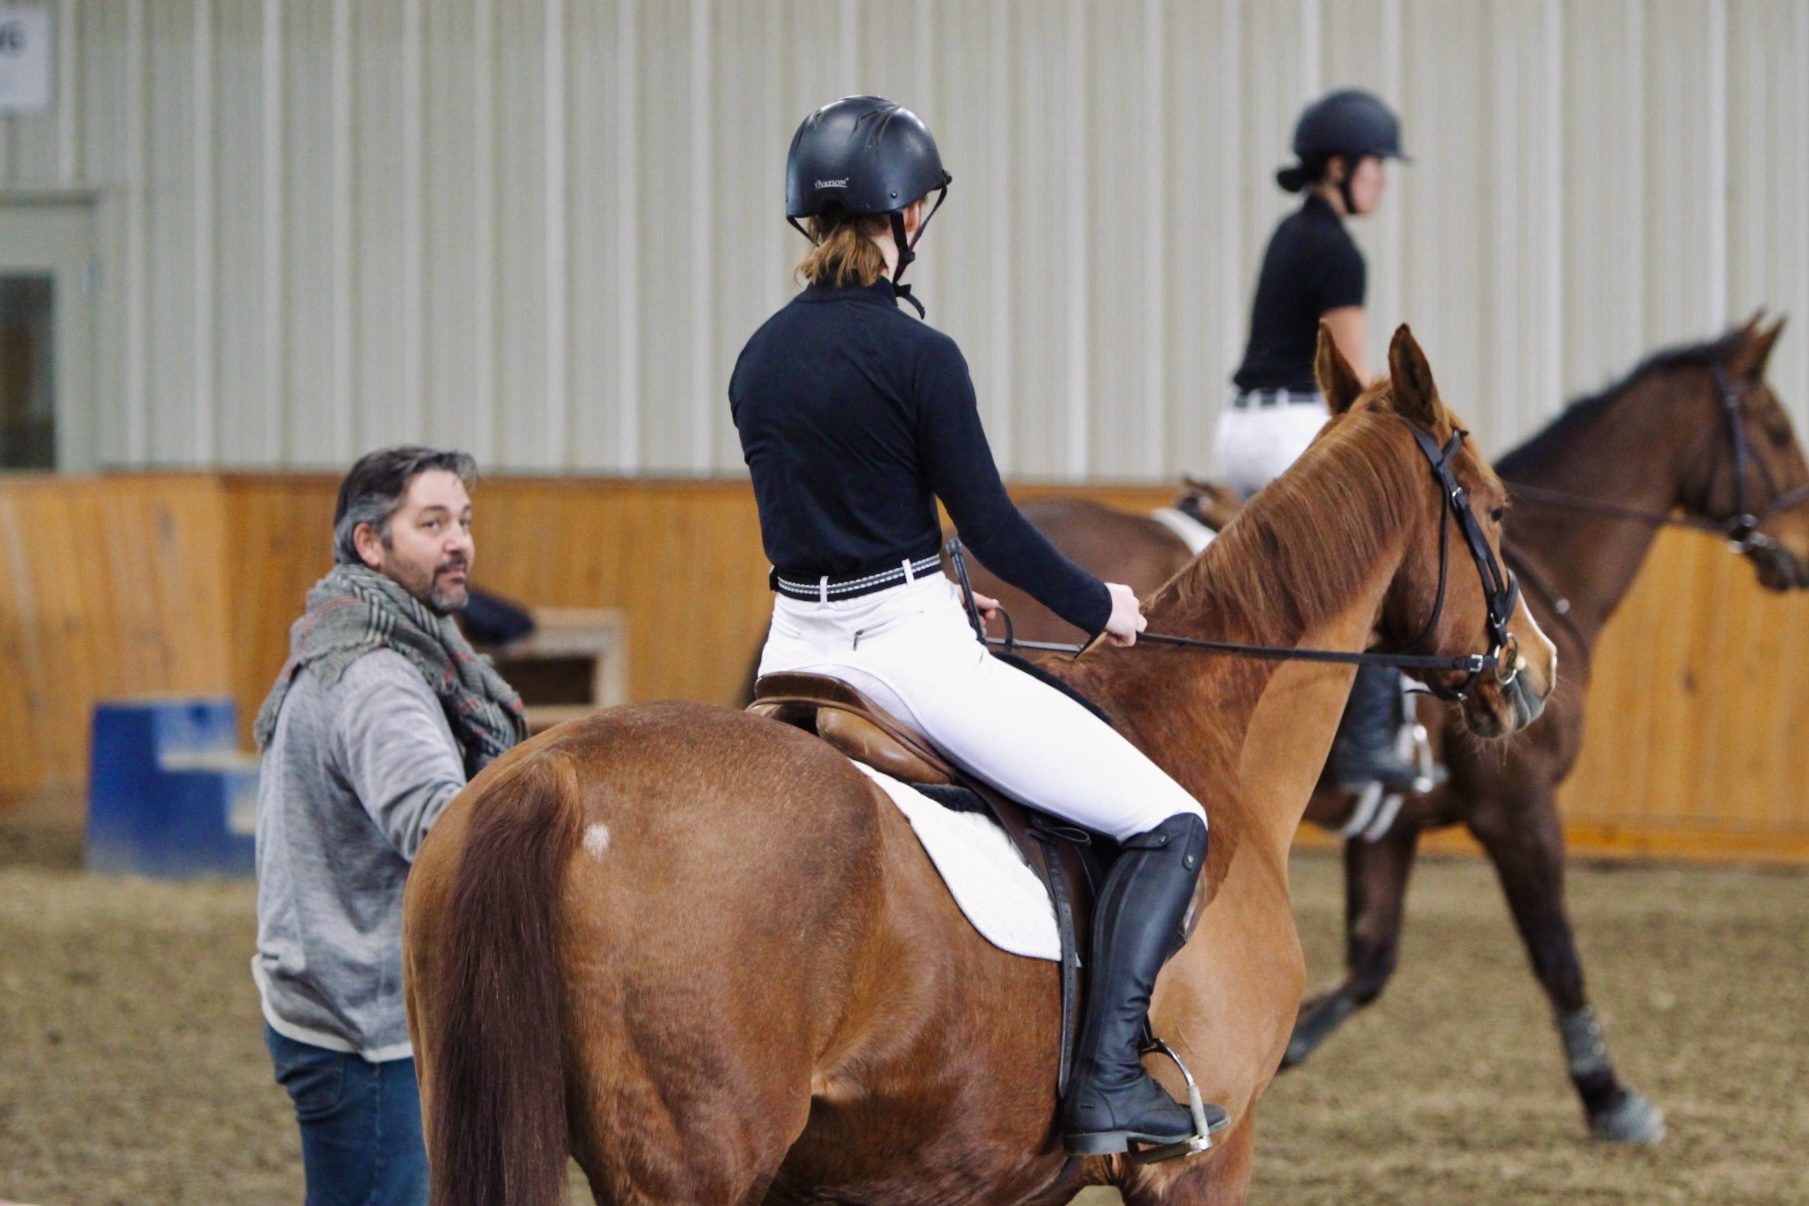 Frederick teaching students during clinic in large indoor arena